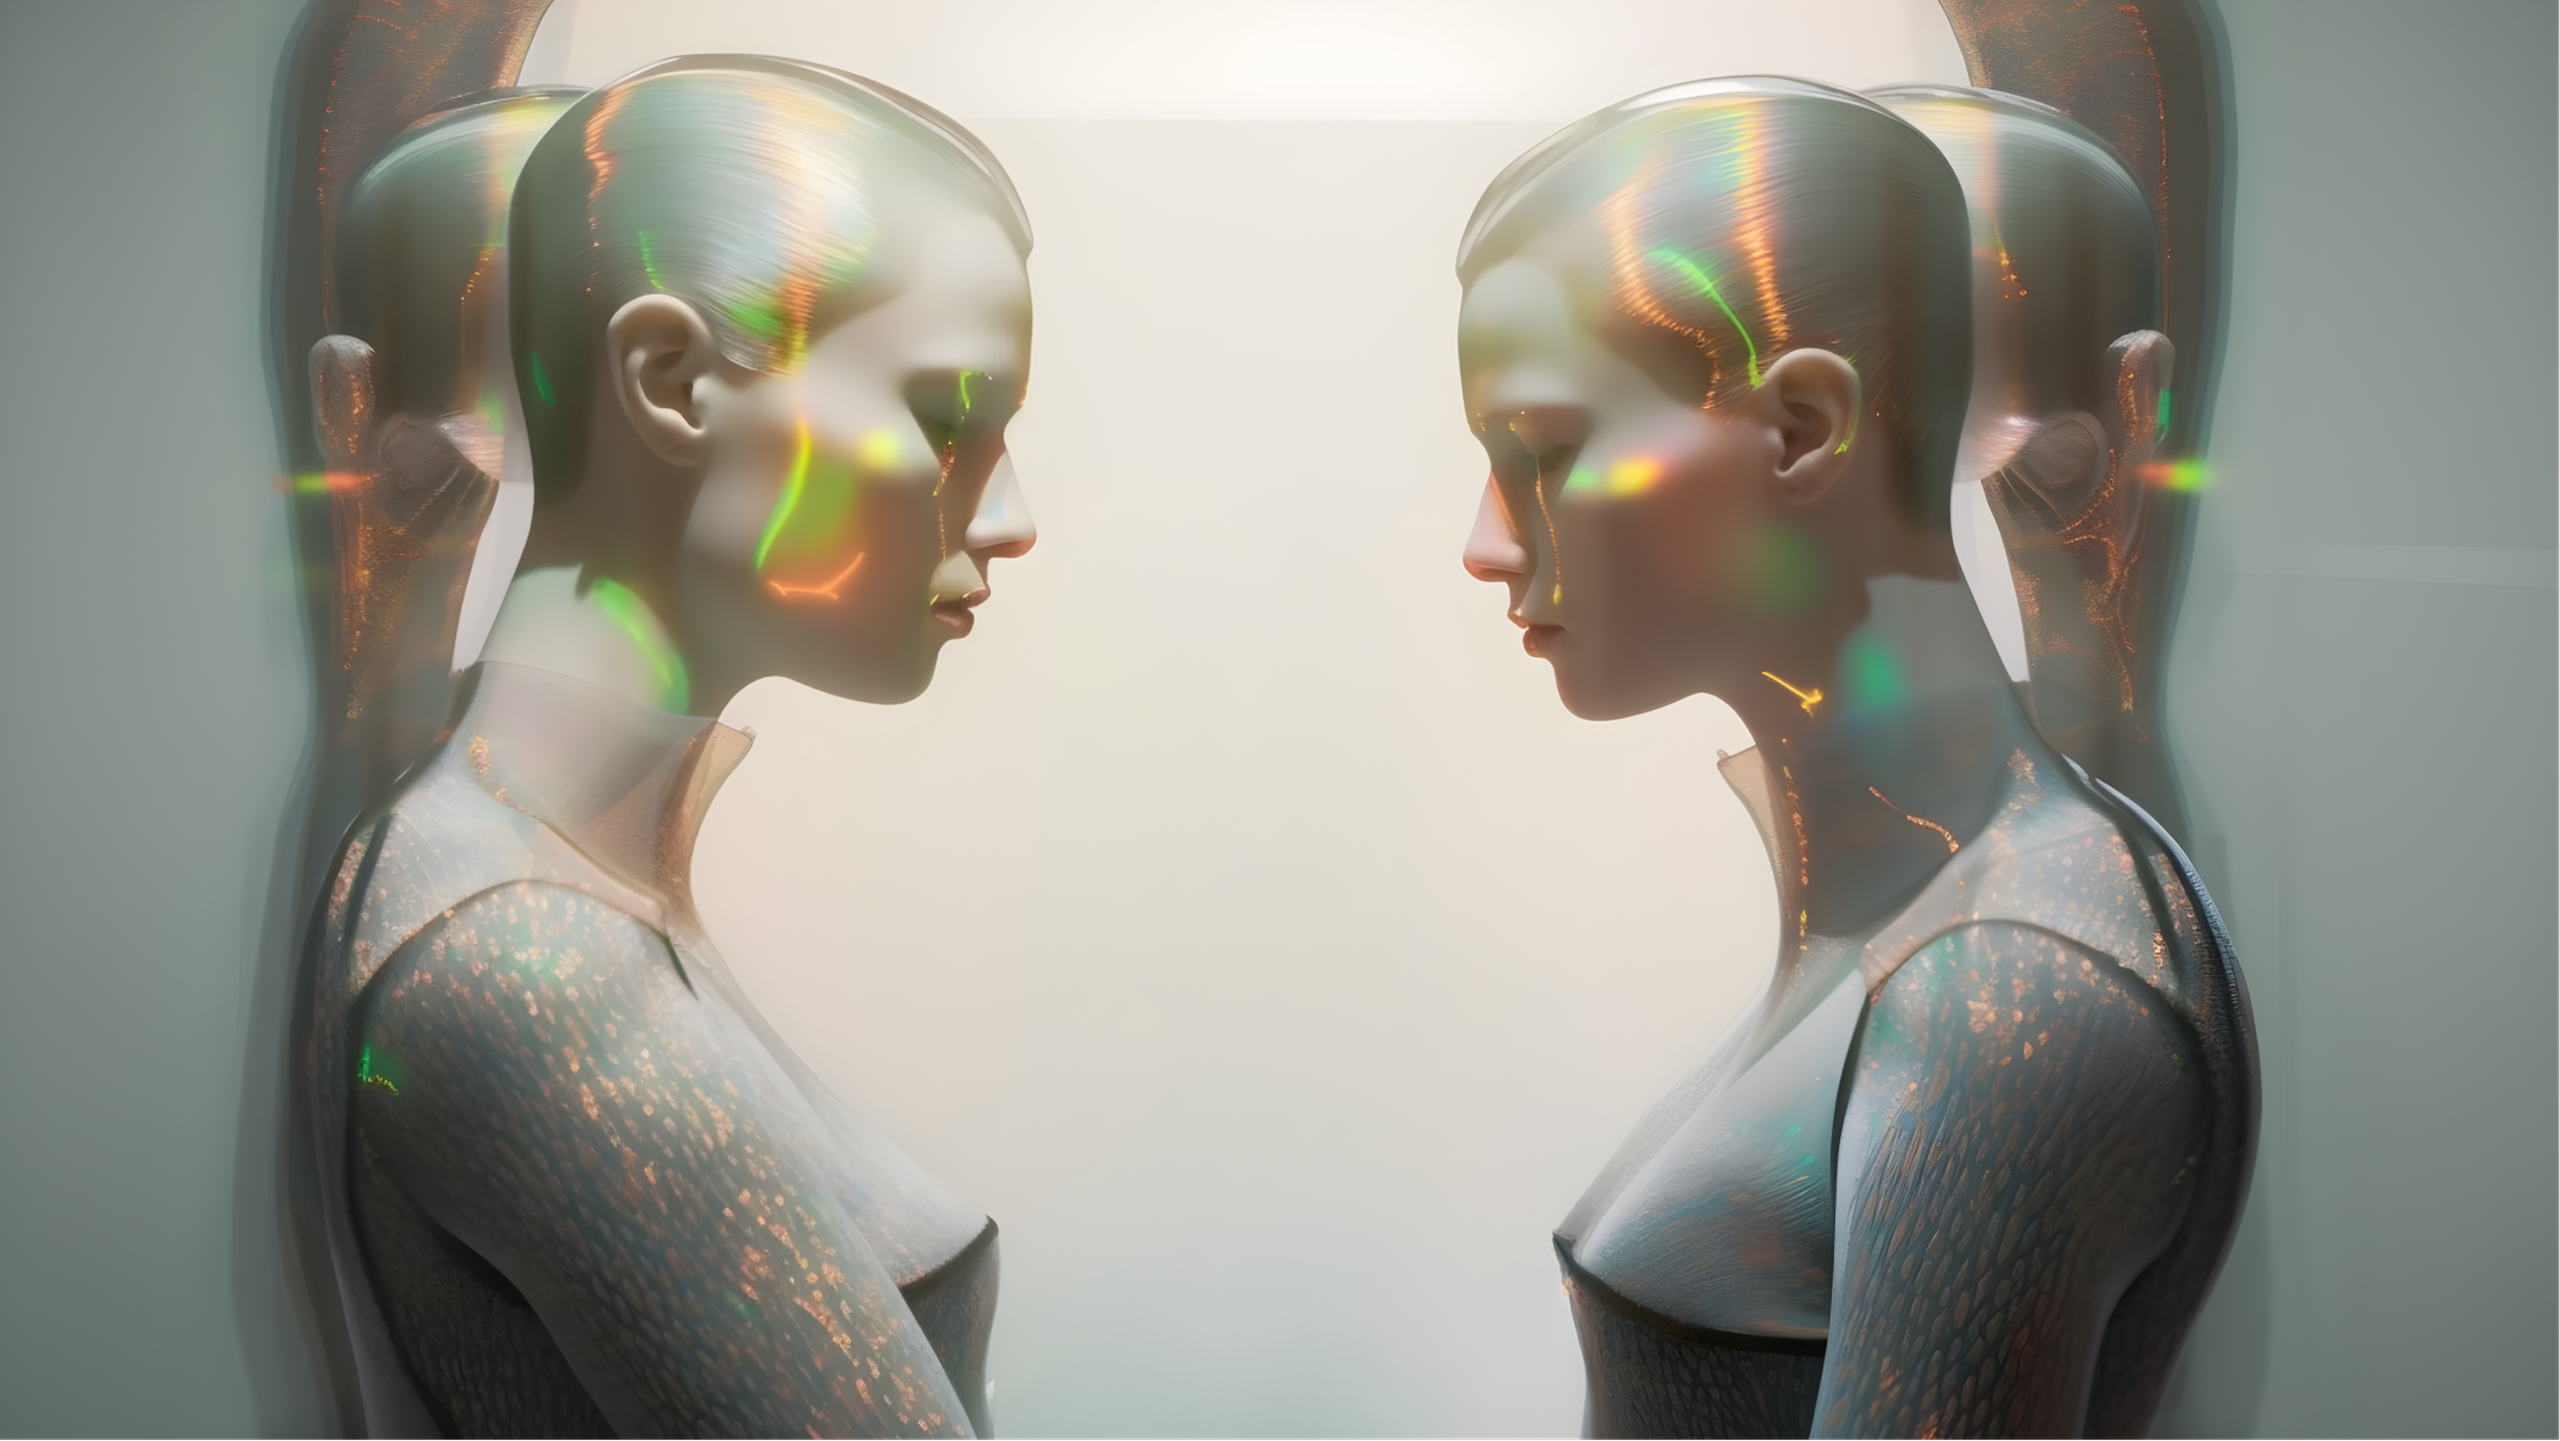 Photo realistic image: two pale robot-human‑esque characters with their heads bowed stand opposite each other. They are lit by multiple iridescent green and orange streaks of light. 